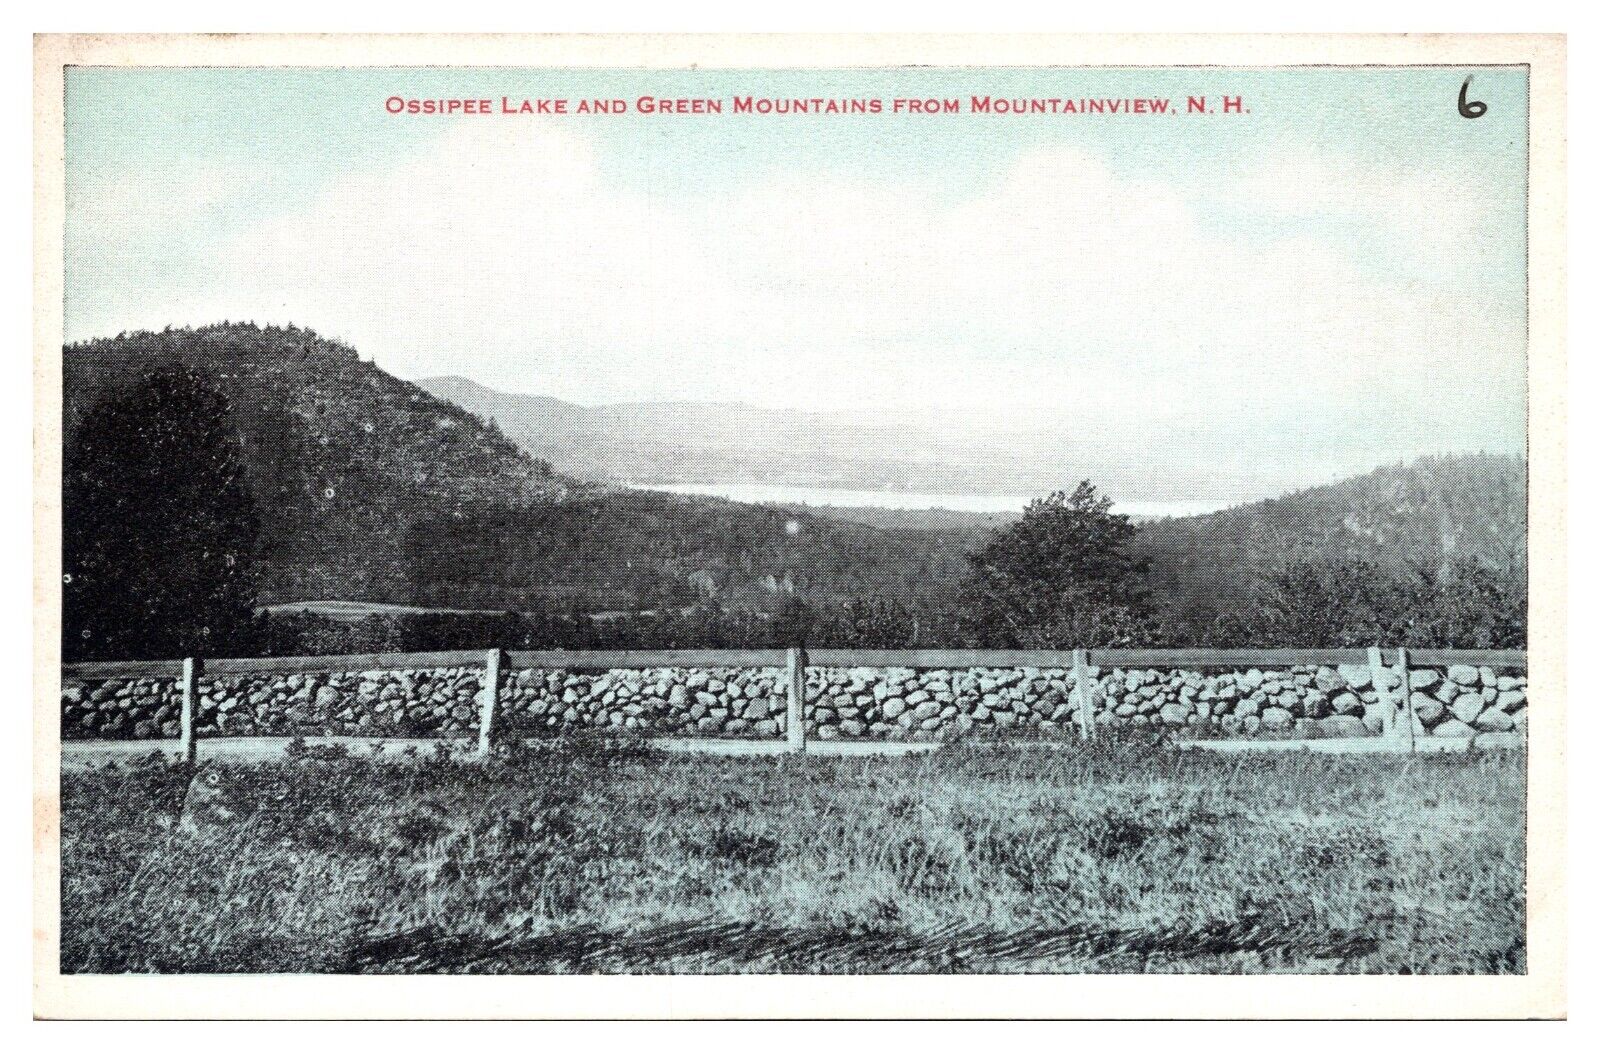 ANTQ Ossipee Lake and Green Mountains, Scenic Landscape, Mountainview, NH 